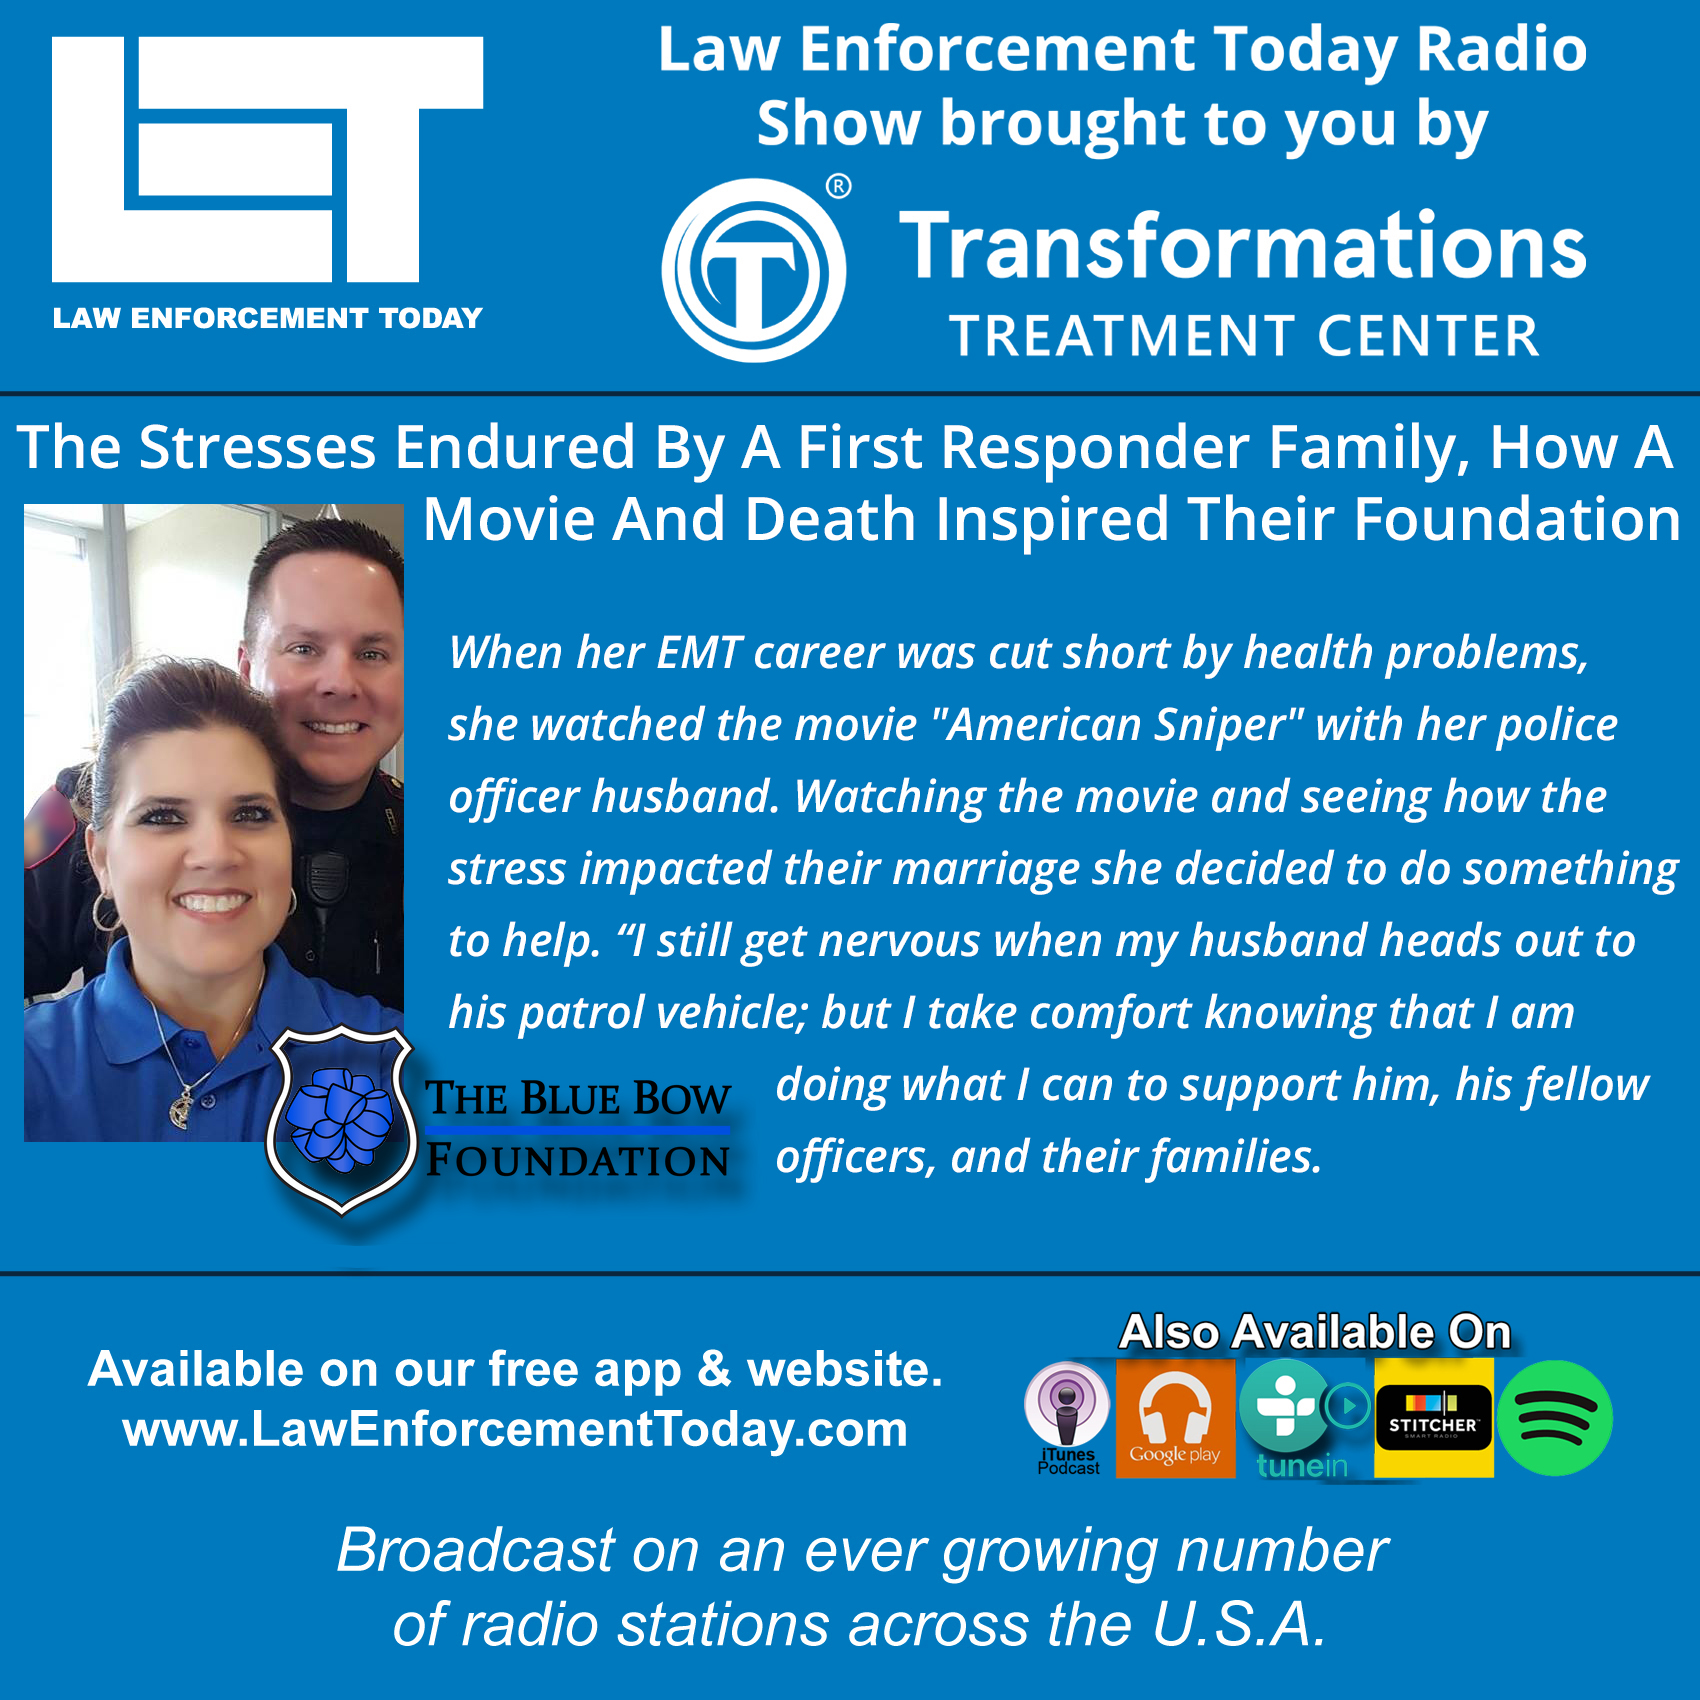 S3E43: Stresses For A First Responder Family,  A Movie Inspired Their Foundation..